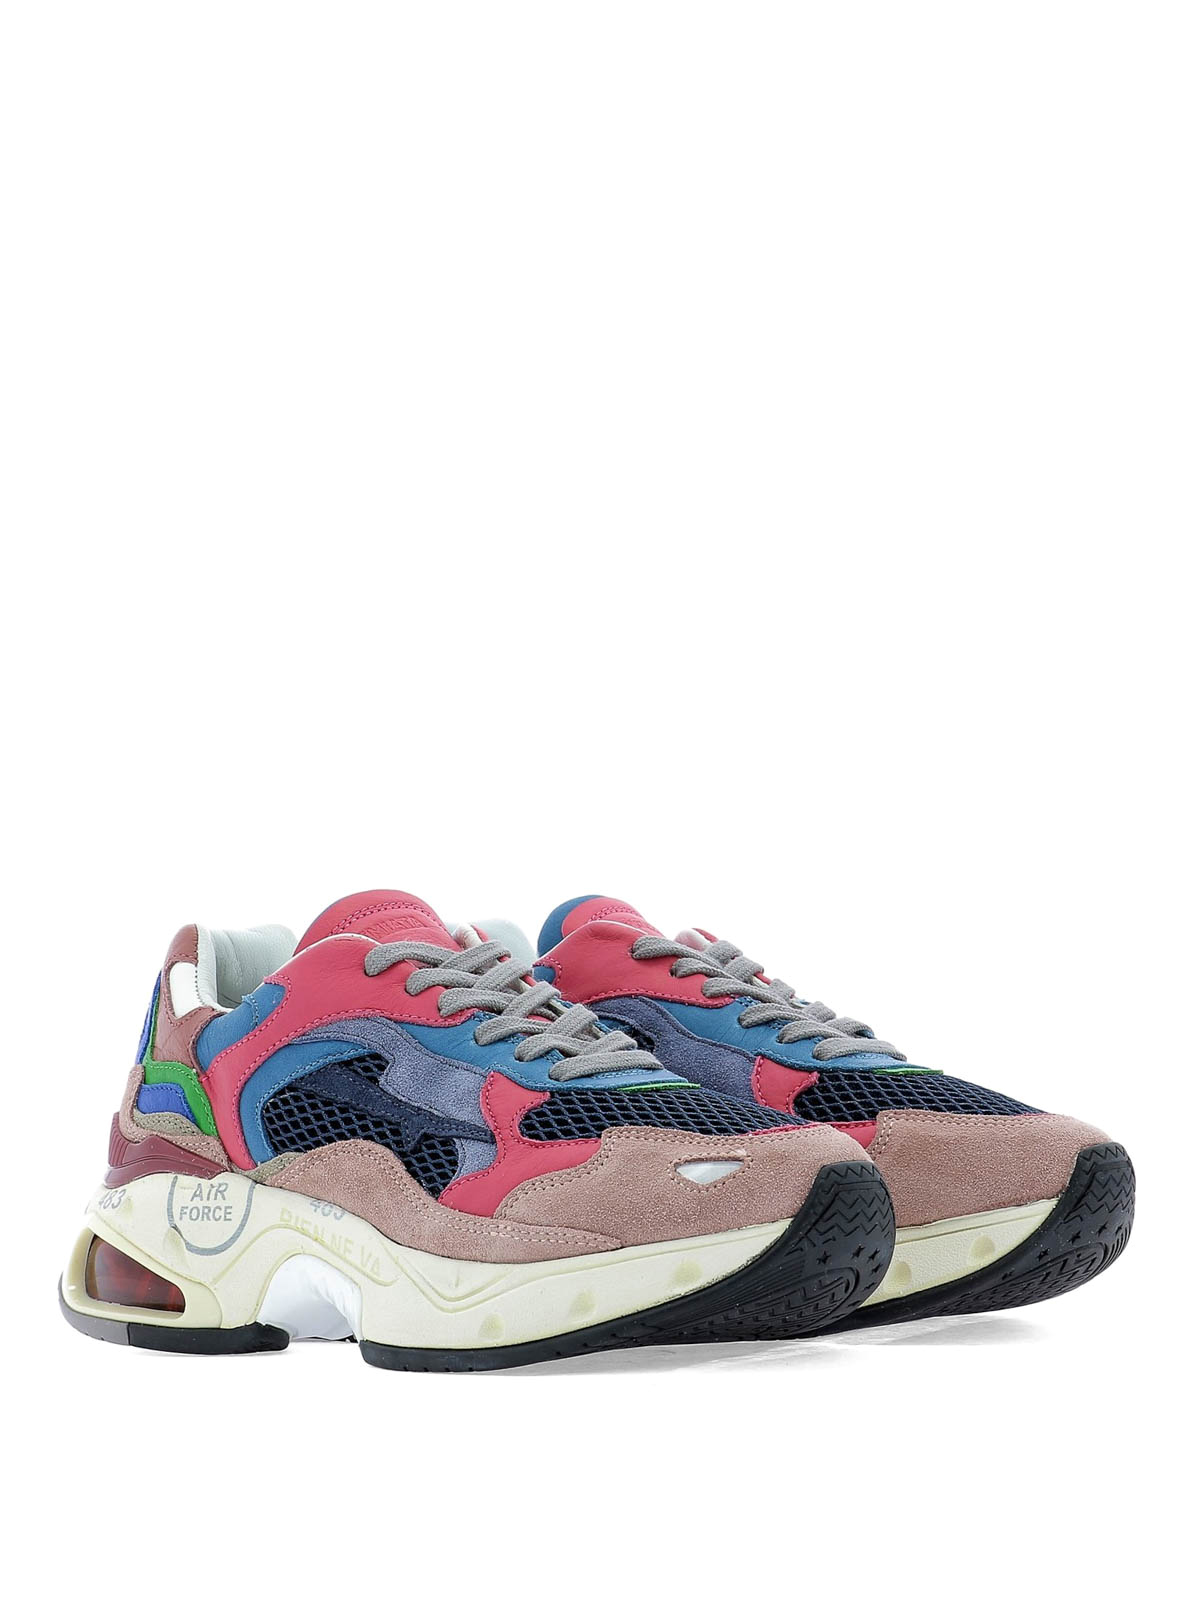 Premiata - Sharky 006 patchwork effect sneakers - trainers - SHARKY006